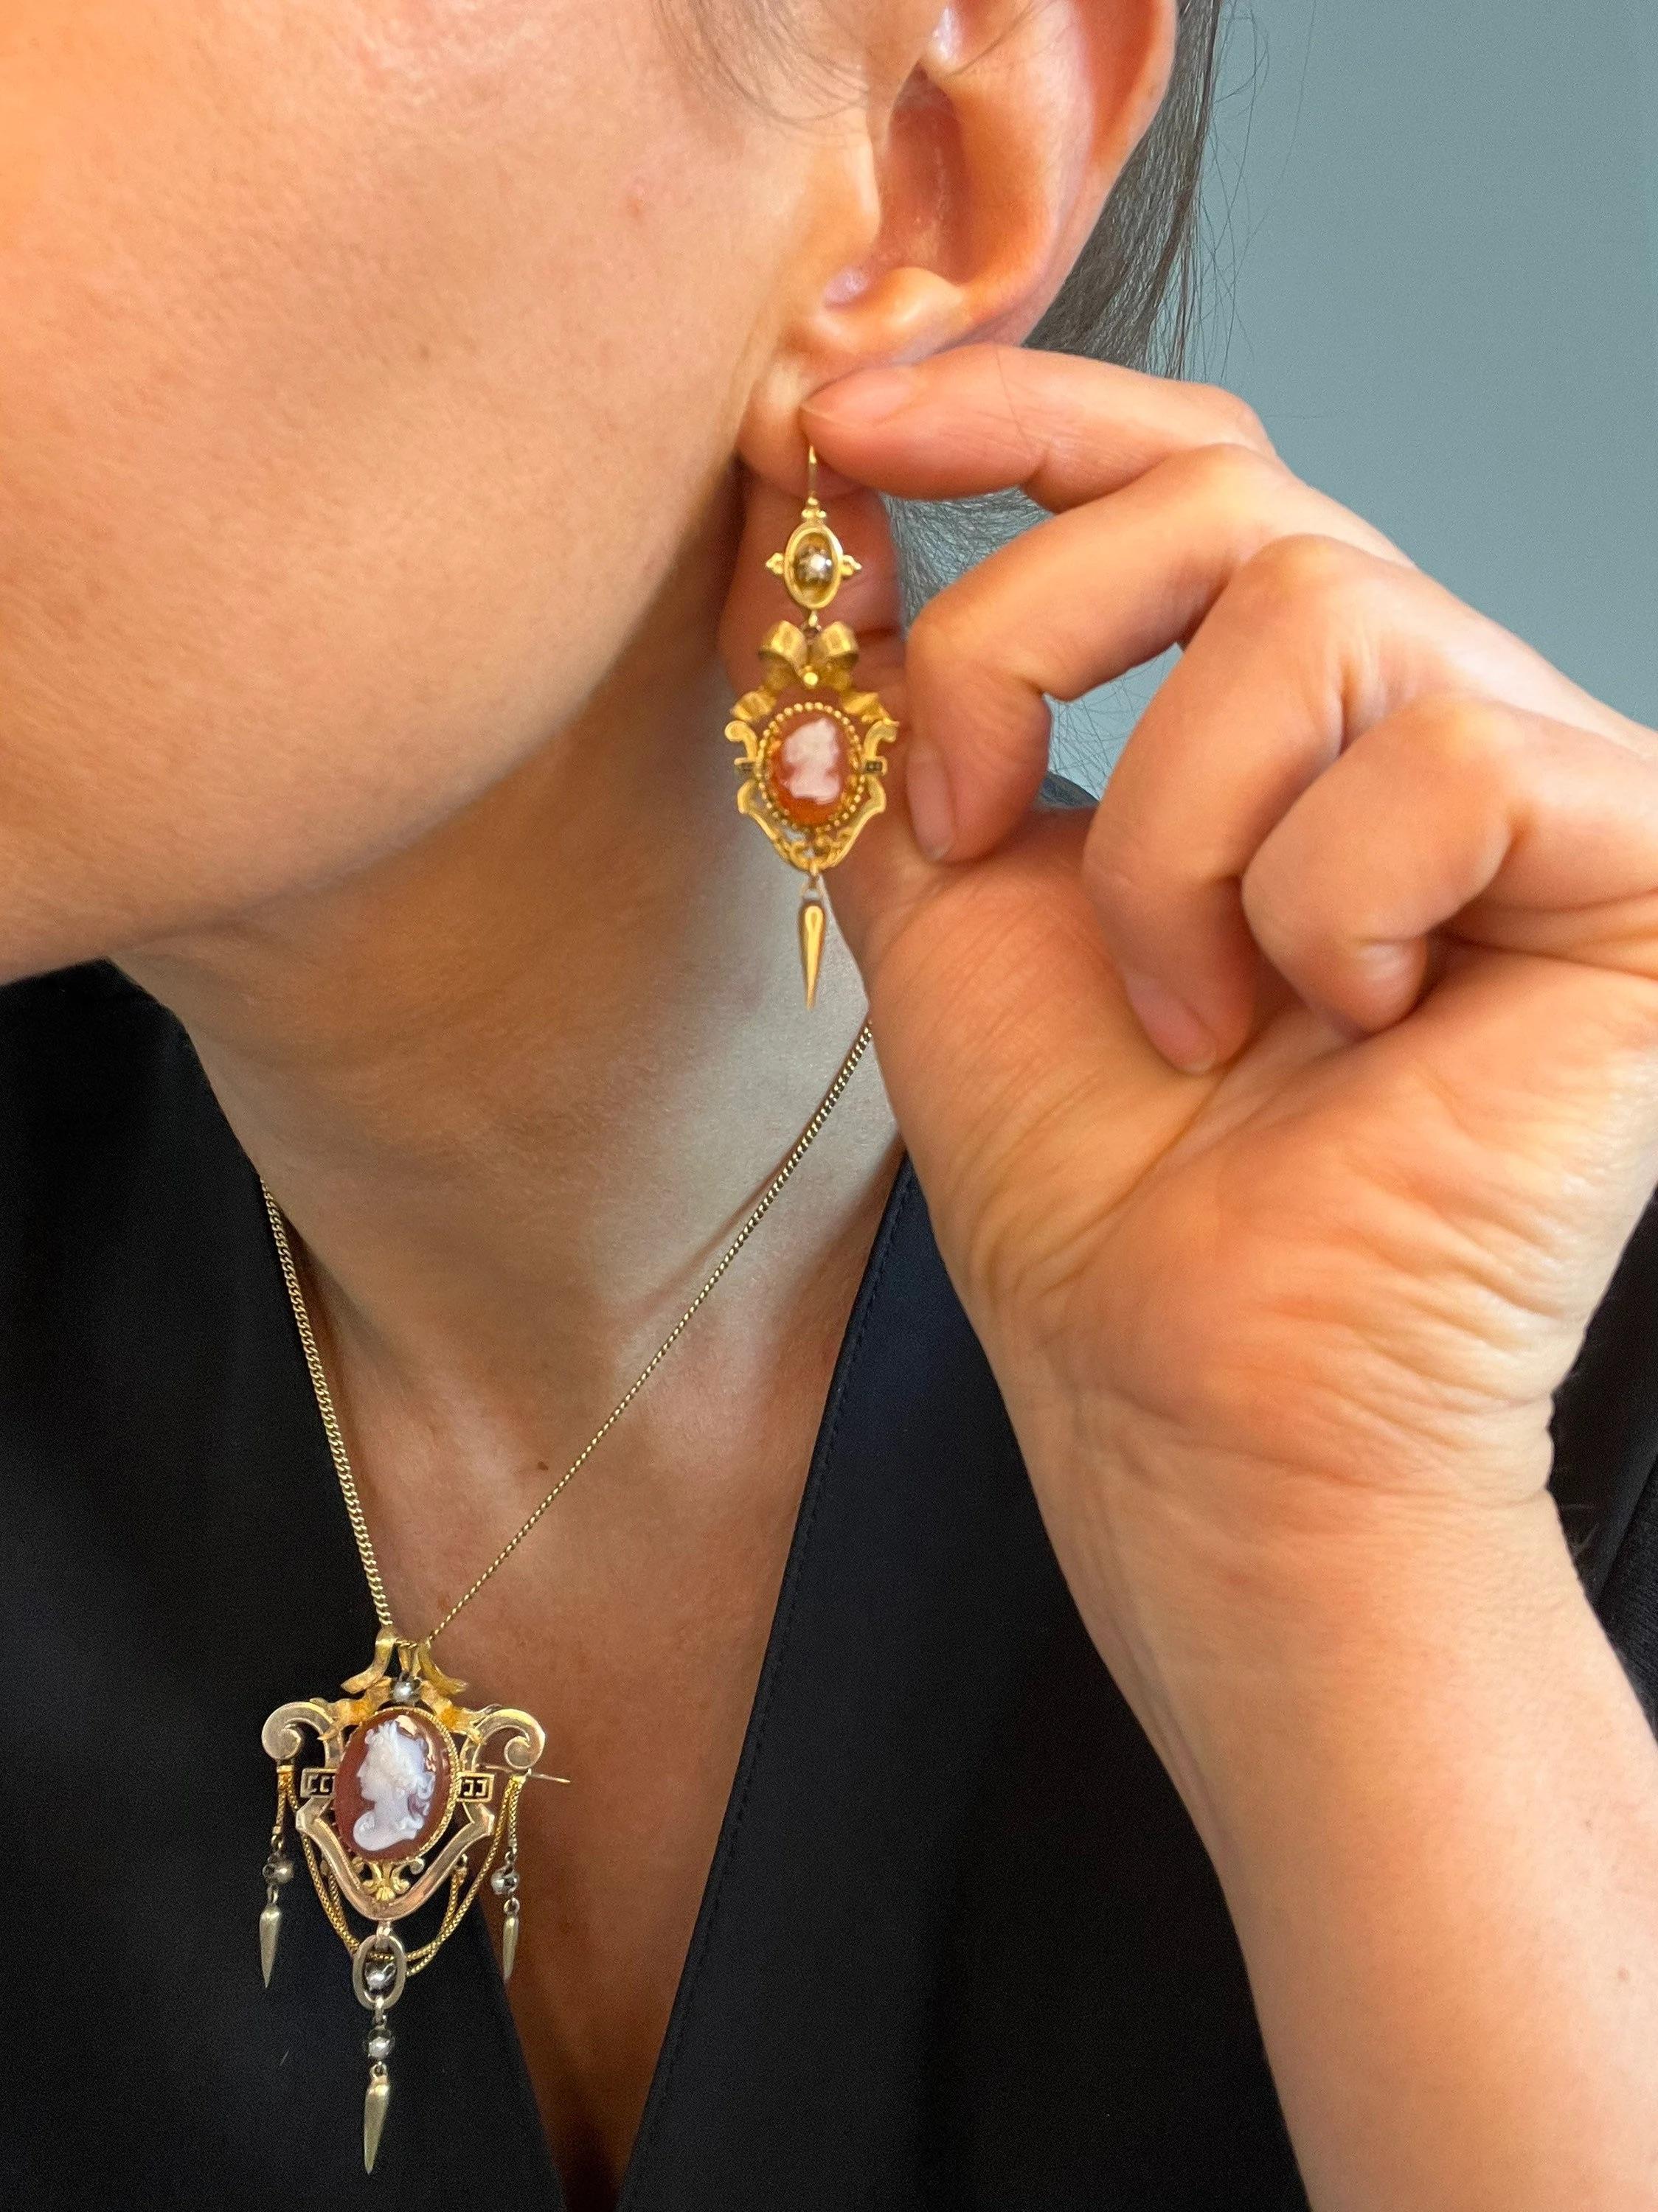 Antique Cameo Earrings 

15ct Gold 

Circa 1870

Gorgeous Victorian, Carnelian Hardstone Cameo Earrings. Beautiful Bow Topped, Drop/Dangle Style Earrings. 
Set with Little Seed Pearls & Torpedo Drops. 
Beautifully Decorated with Gold Scrolls & Black